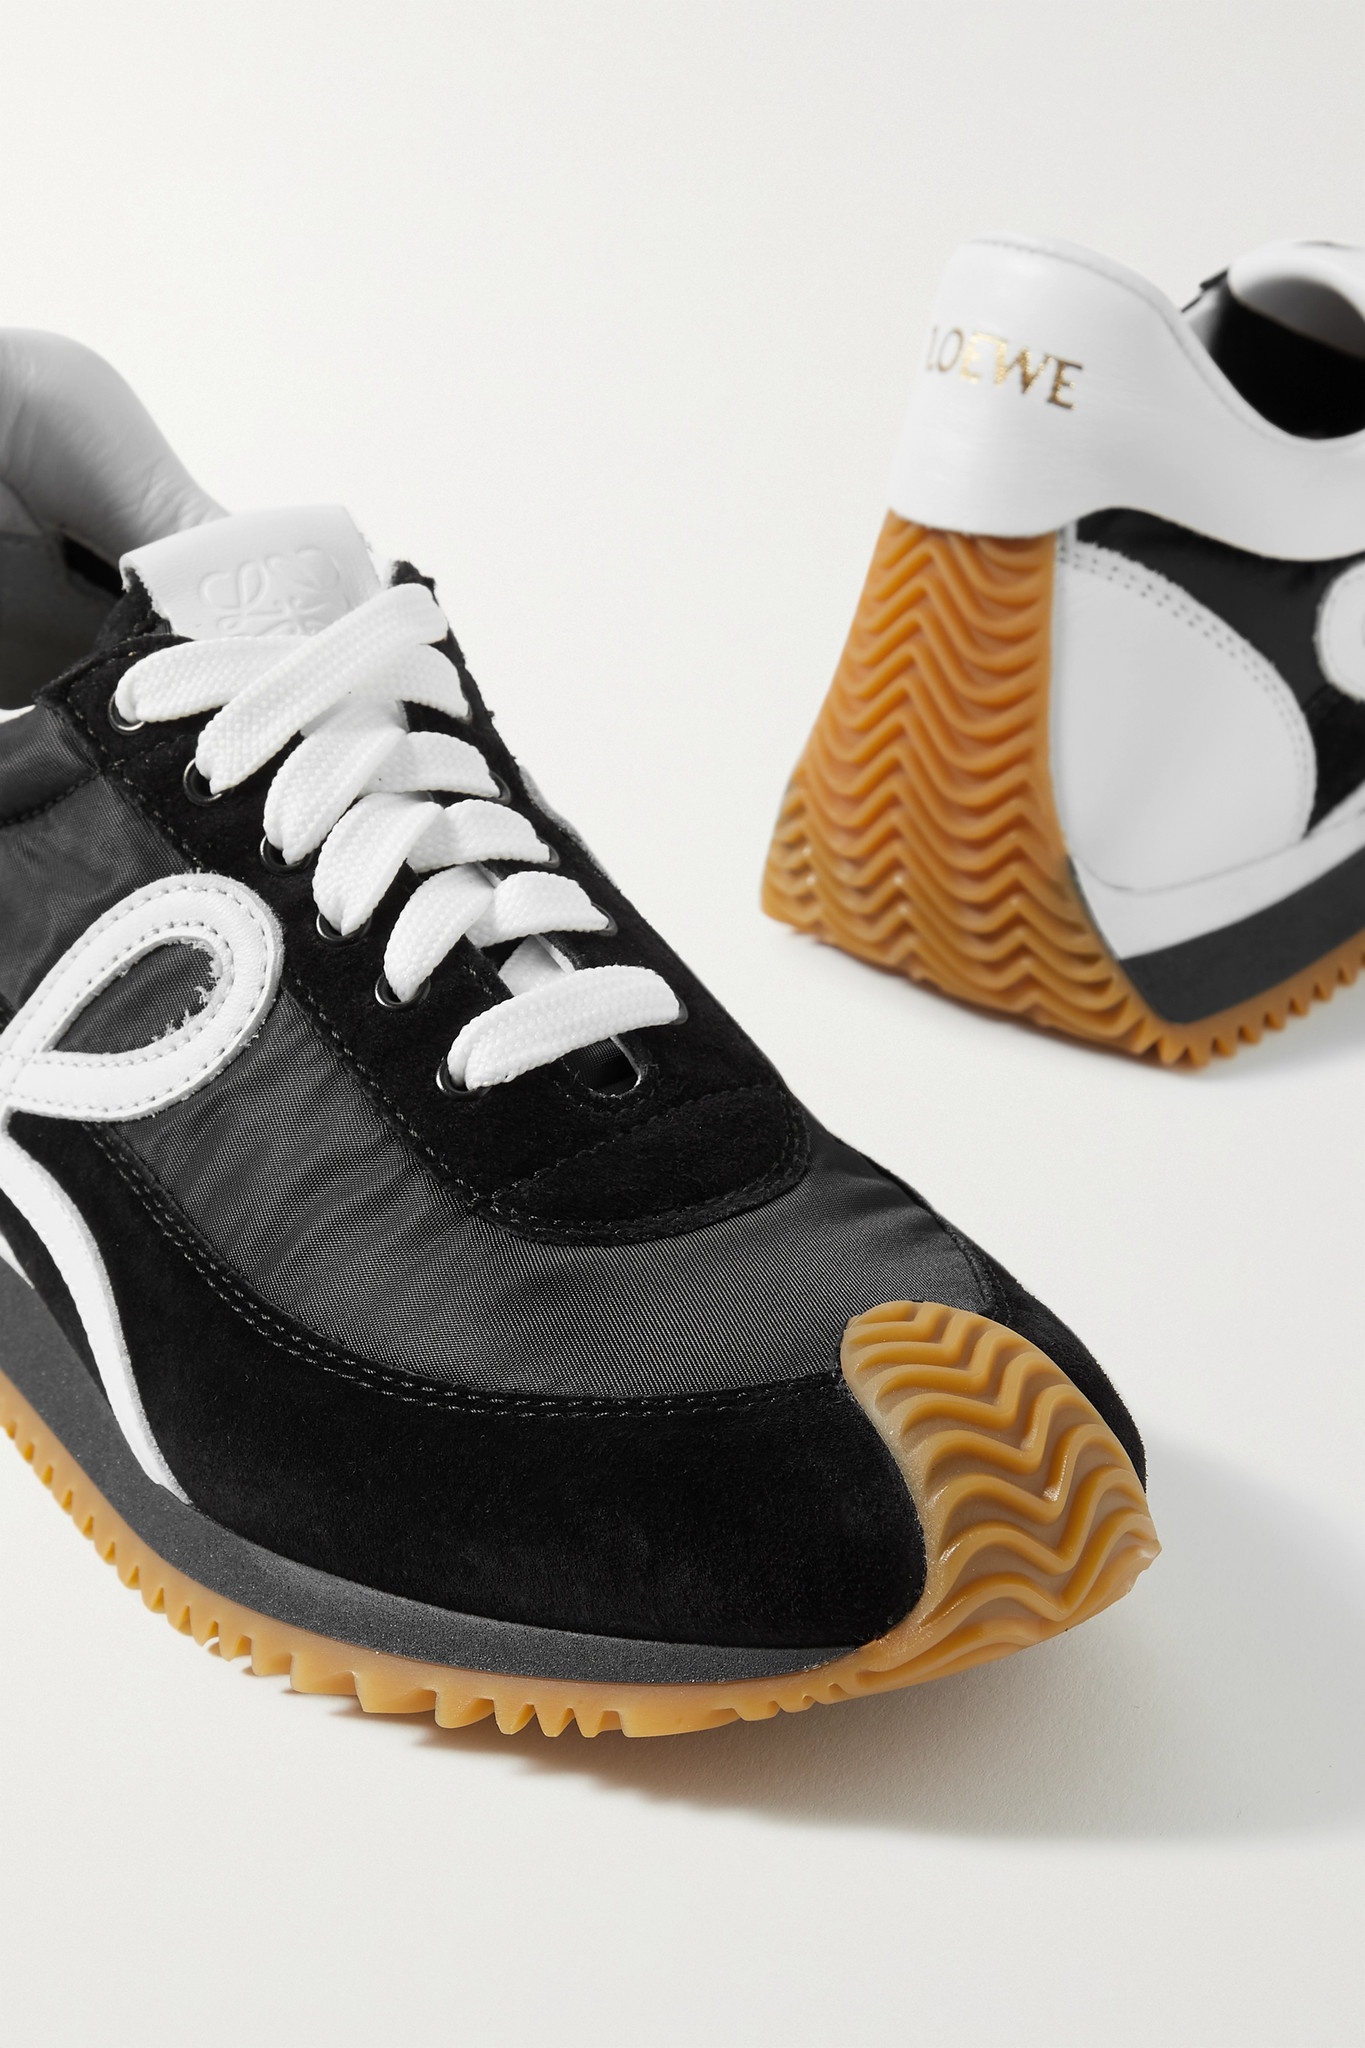 Flow logo-appliquéd shell, leather and suede sneakers - 4